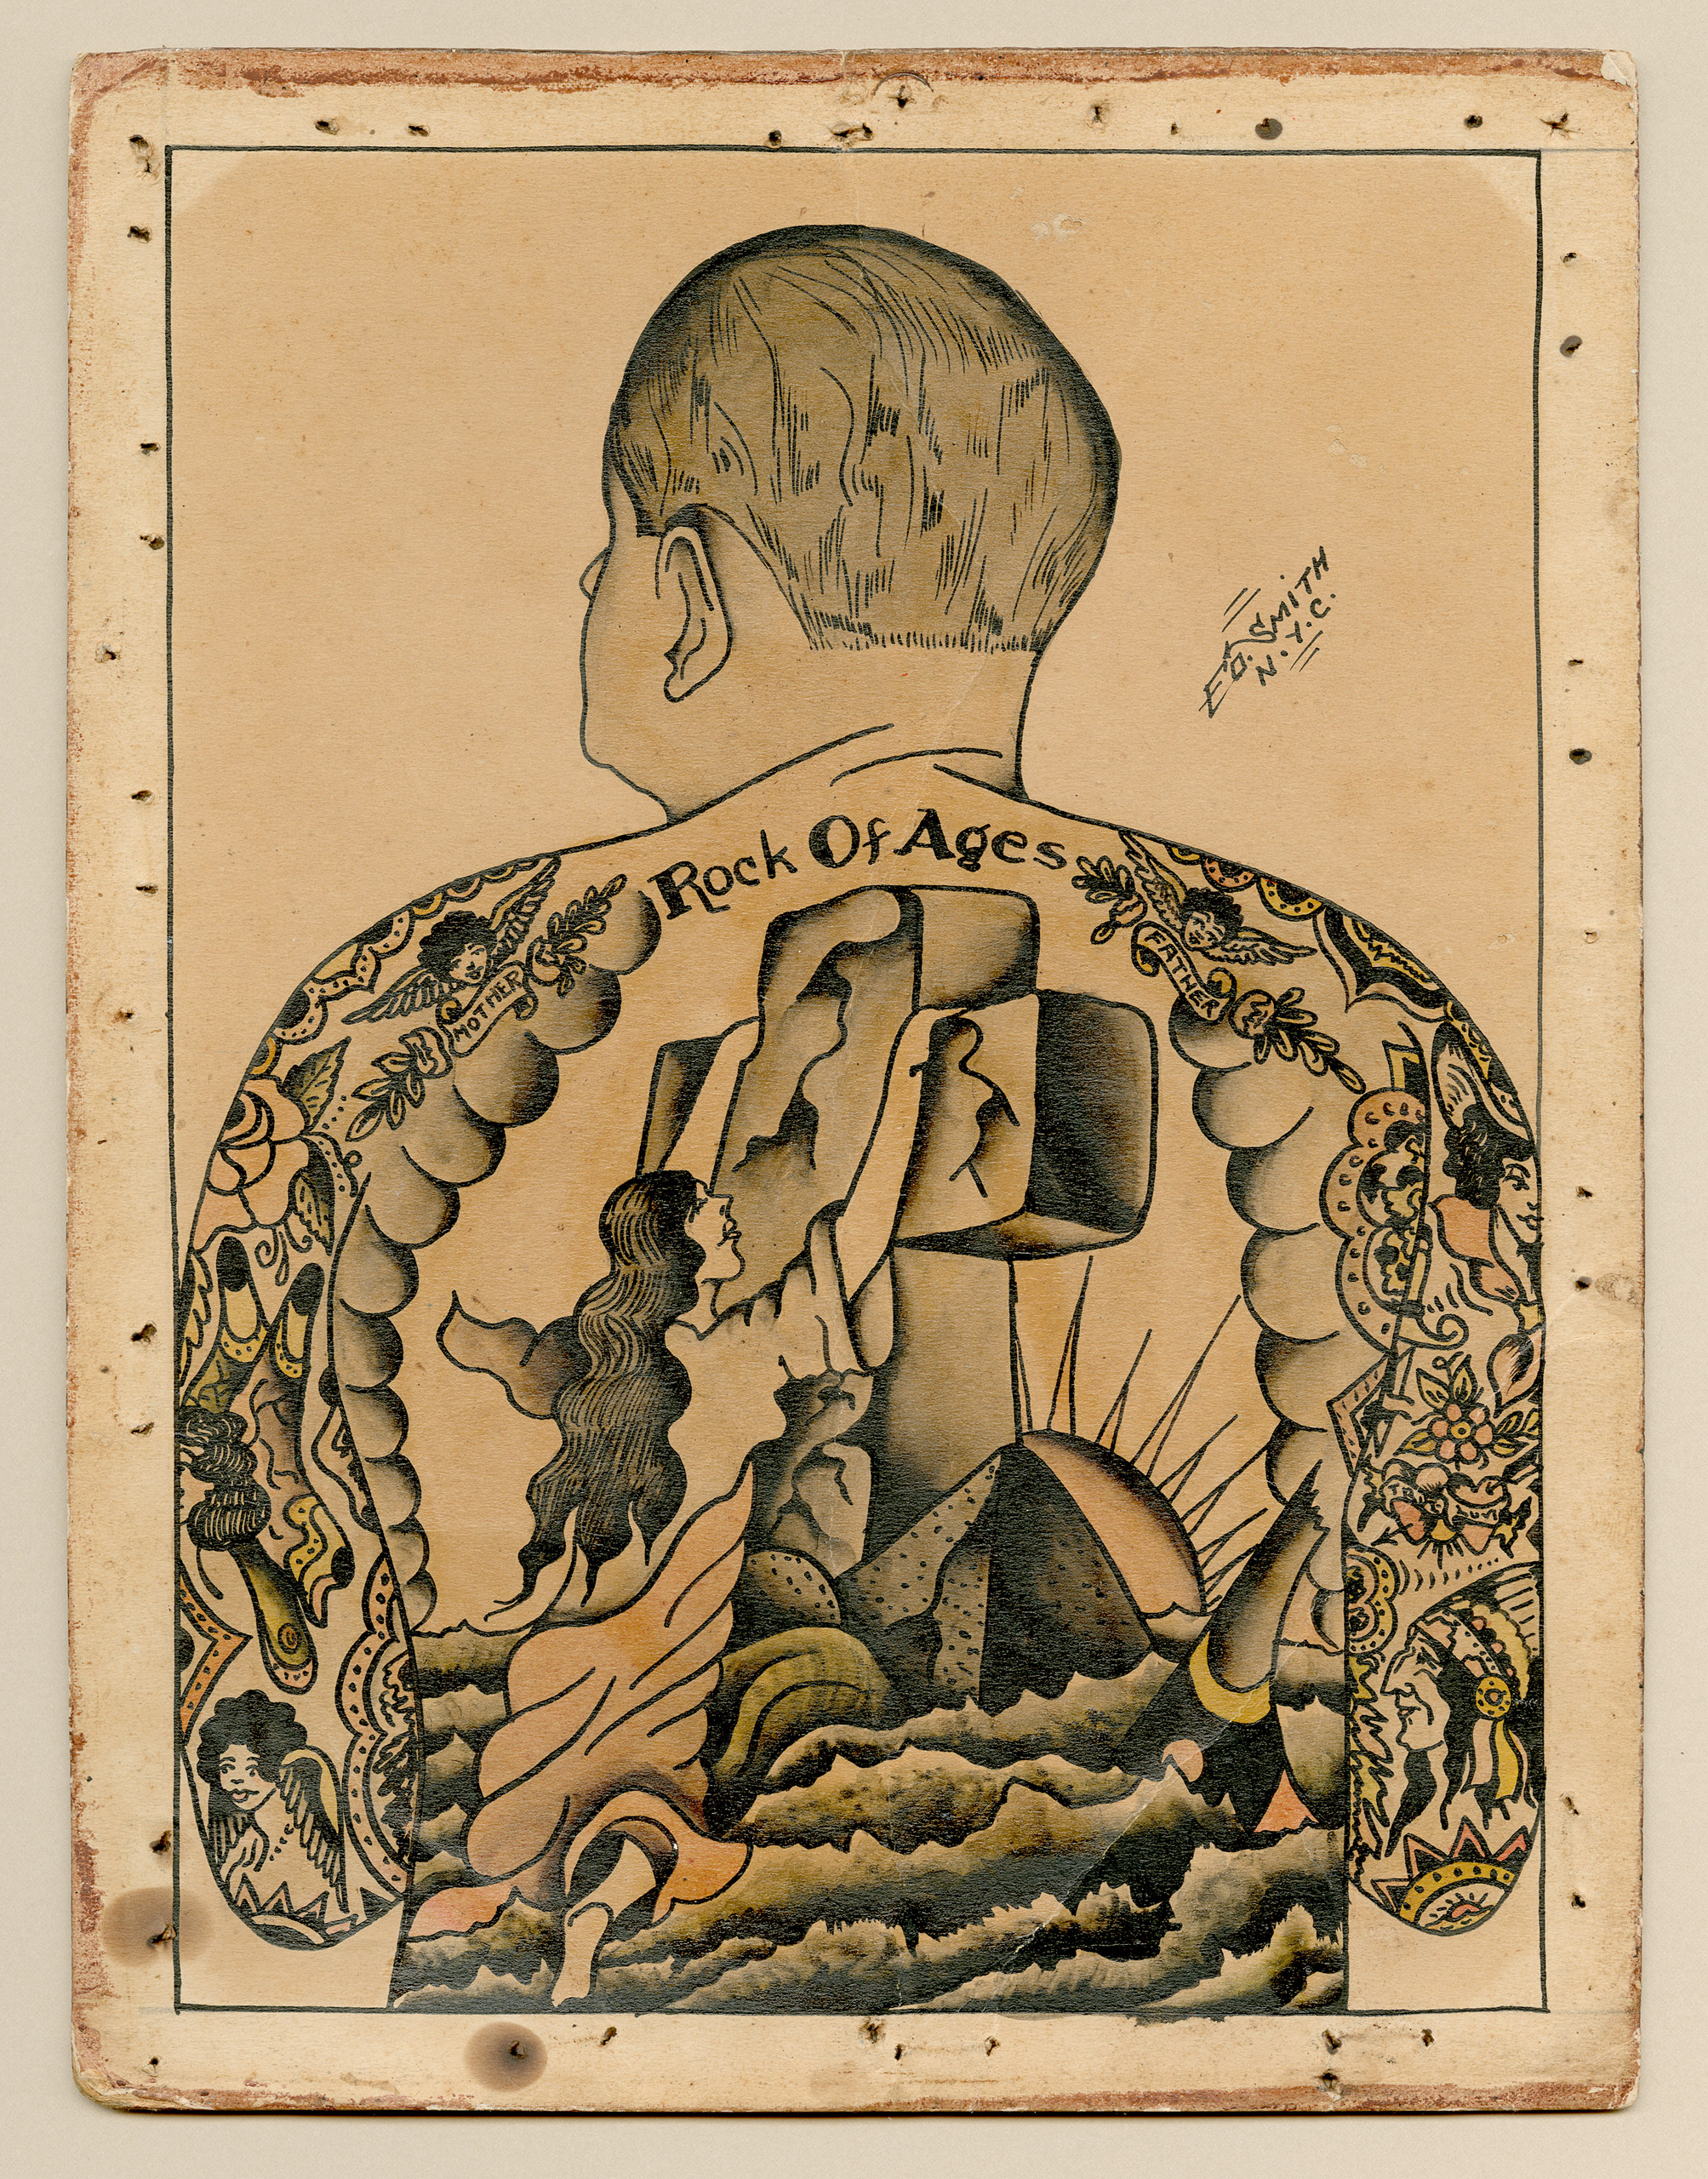 Self-portrait showing Rock of Ages back piece, ca. 1920 by Ed Smith.